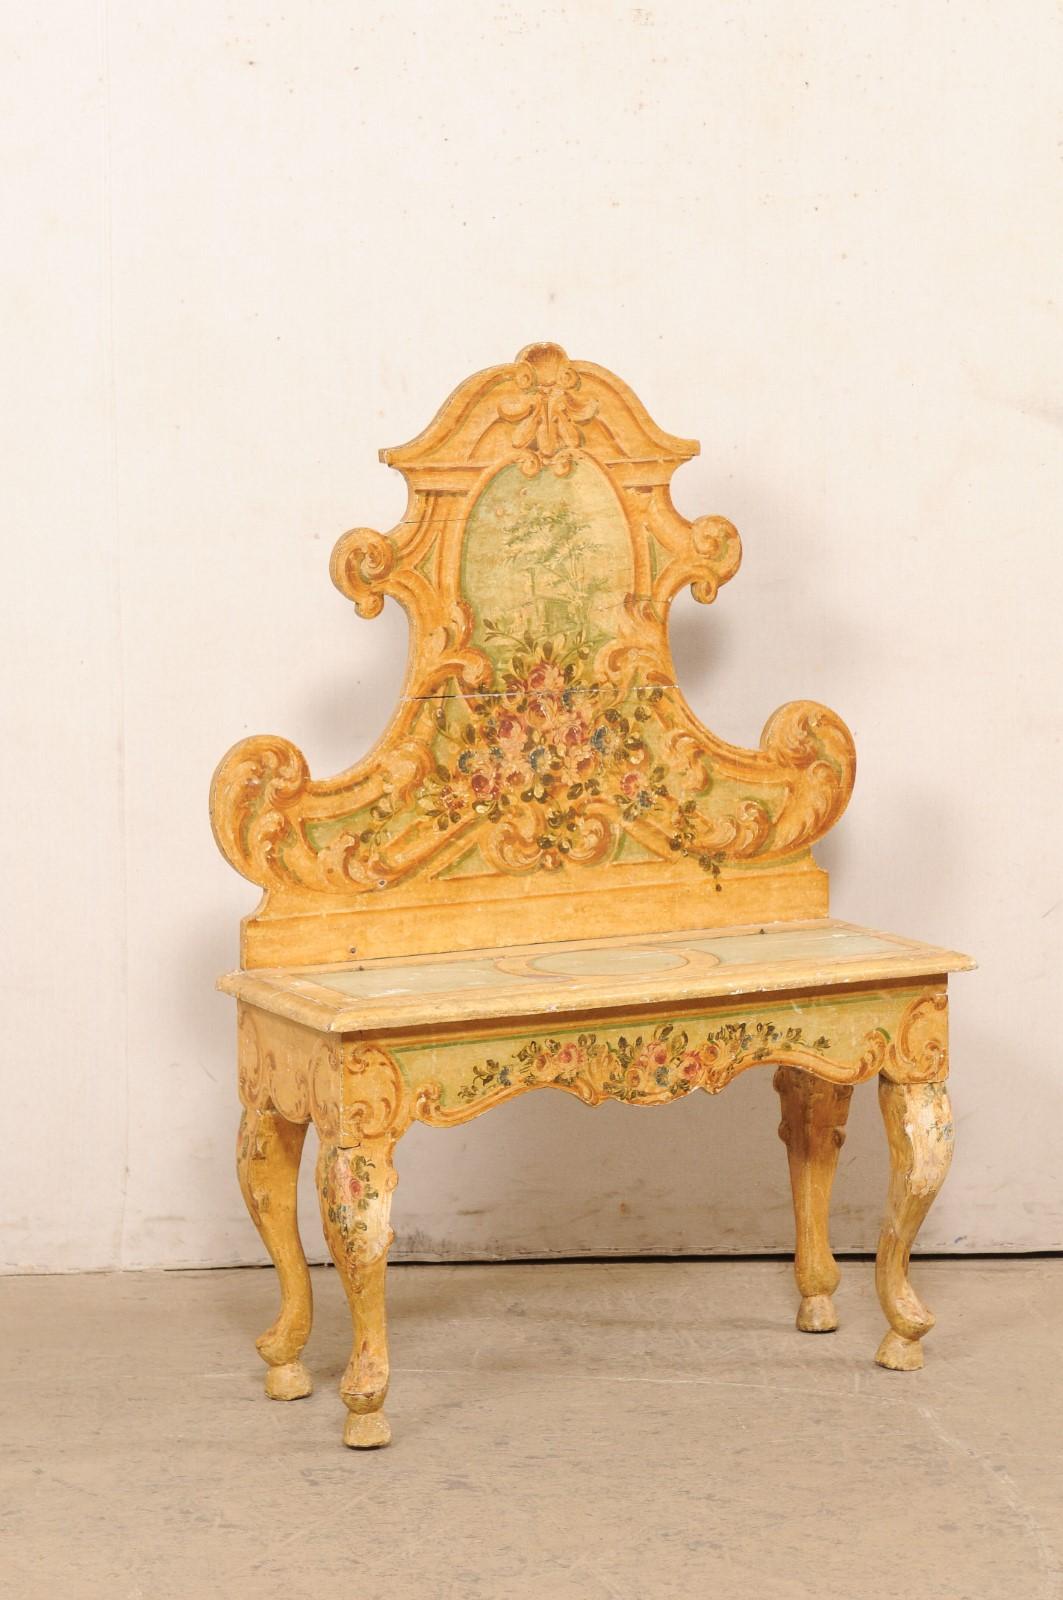 An Italian carved and hand-painted cassapanca (chest bench) from the early 20th century. This antique bench from Italy has an elaborately carved shapely pediment-style back, a scalloped skirt, and is presented on four cabriole legs. The seat has a